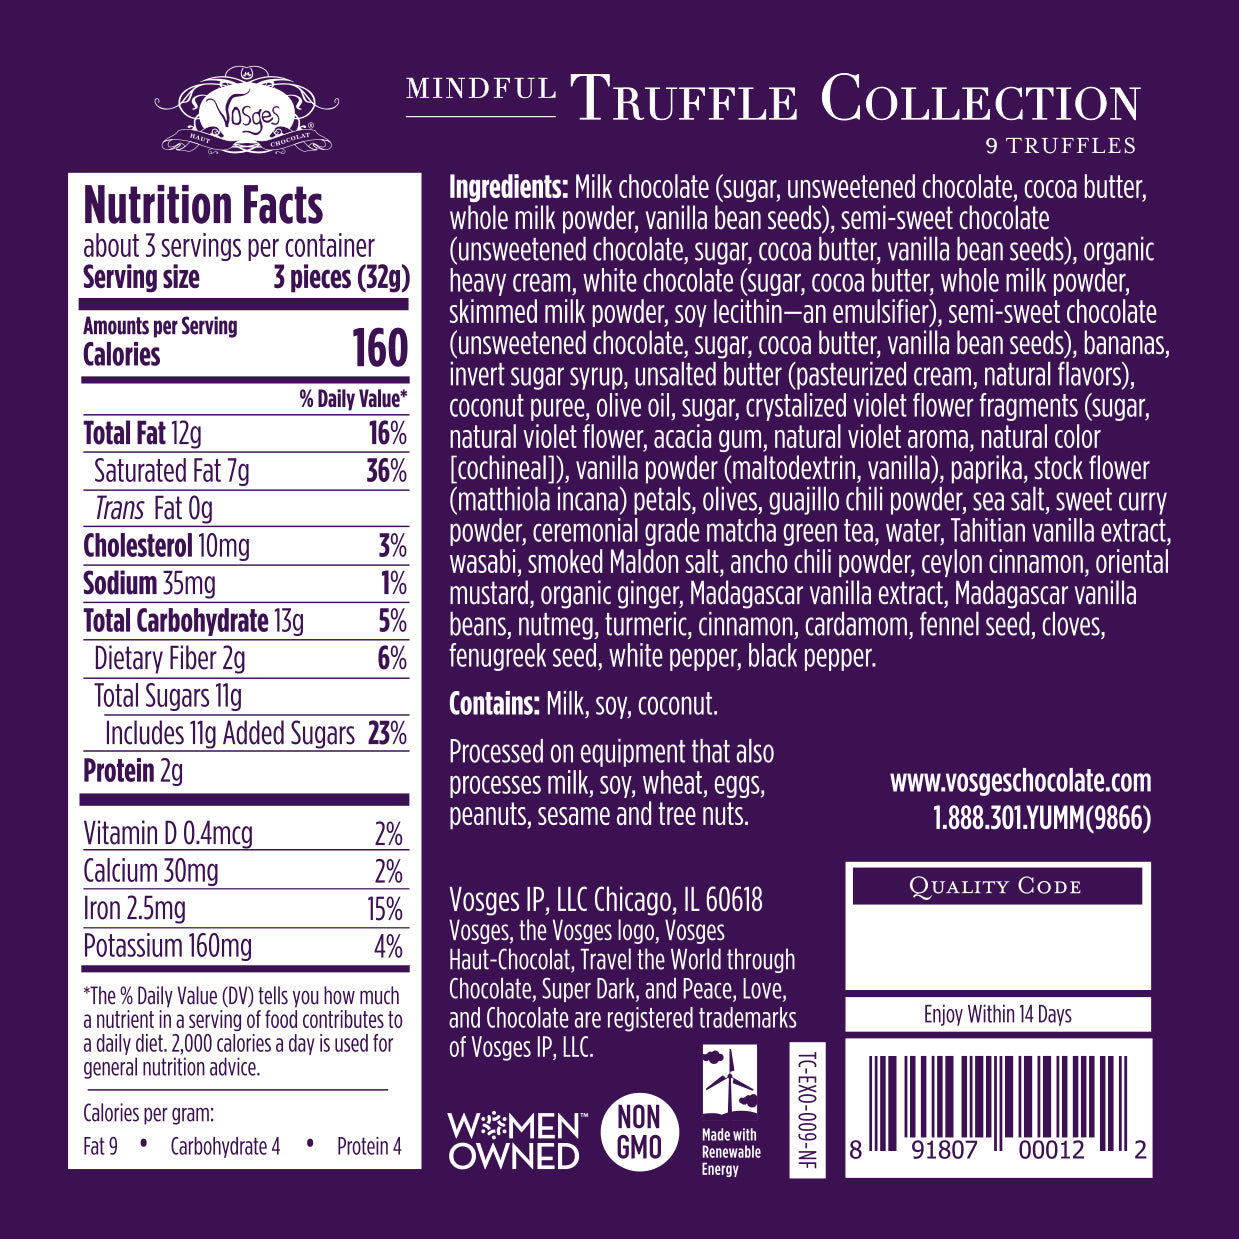 Nutrition Facts and Ingredients of Vosges Haut-Chocolat Mindful Truffle Collection in white, san-serif font on a deep purple background.